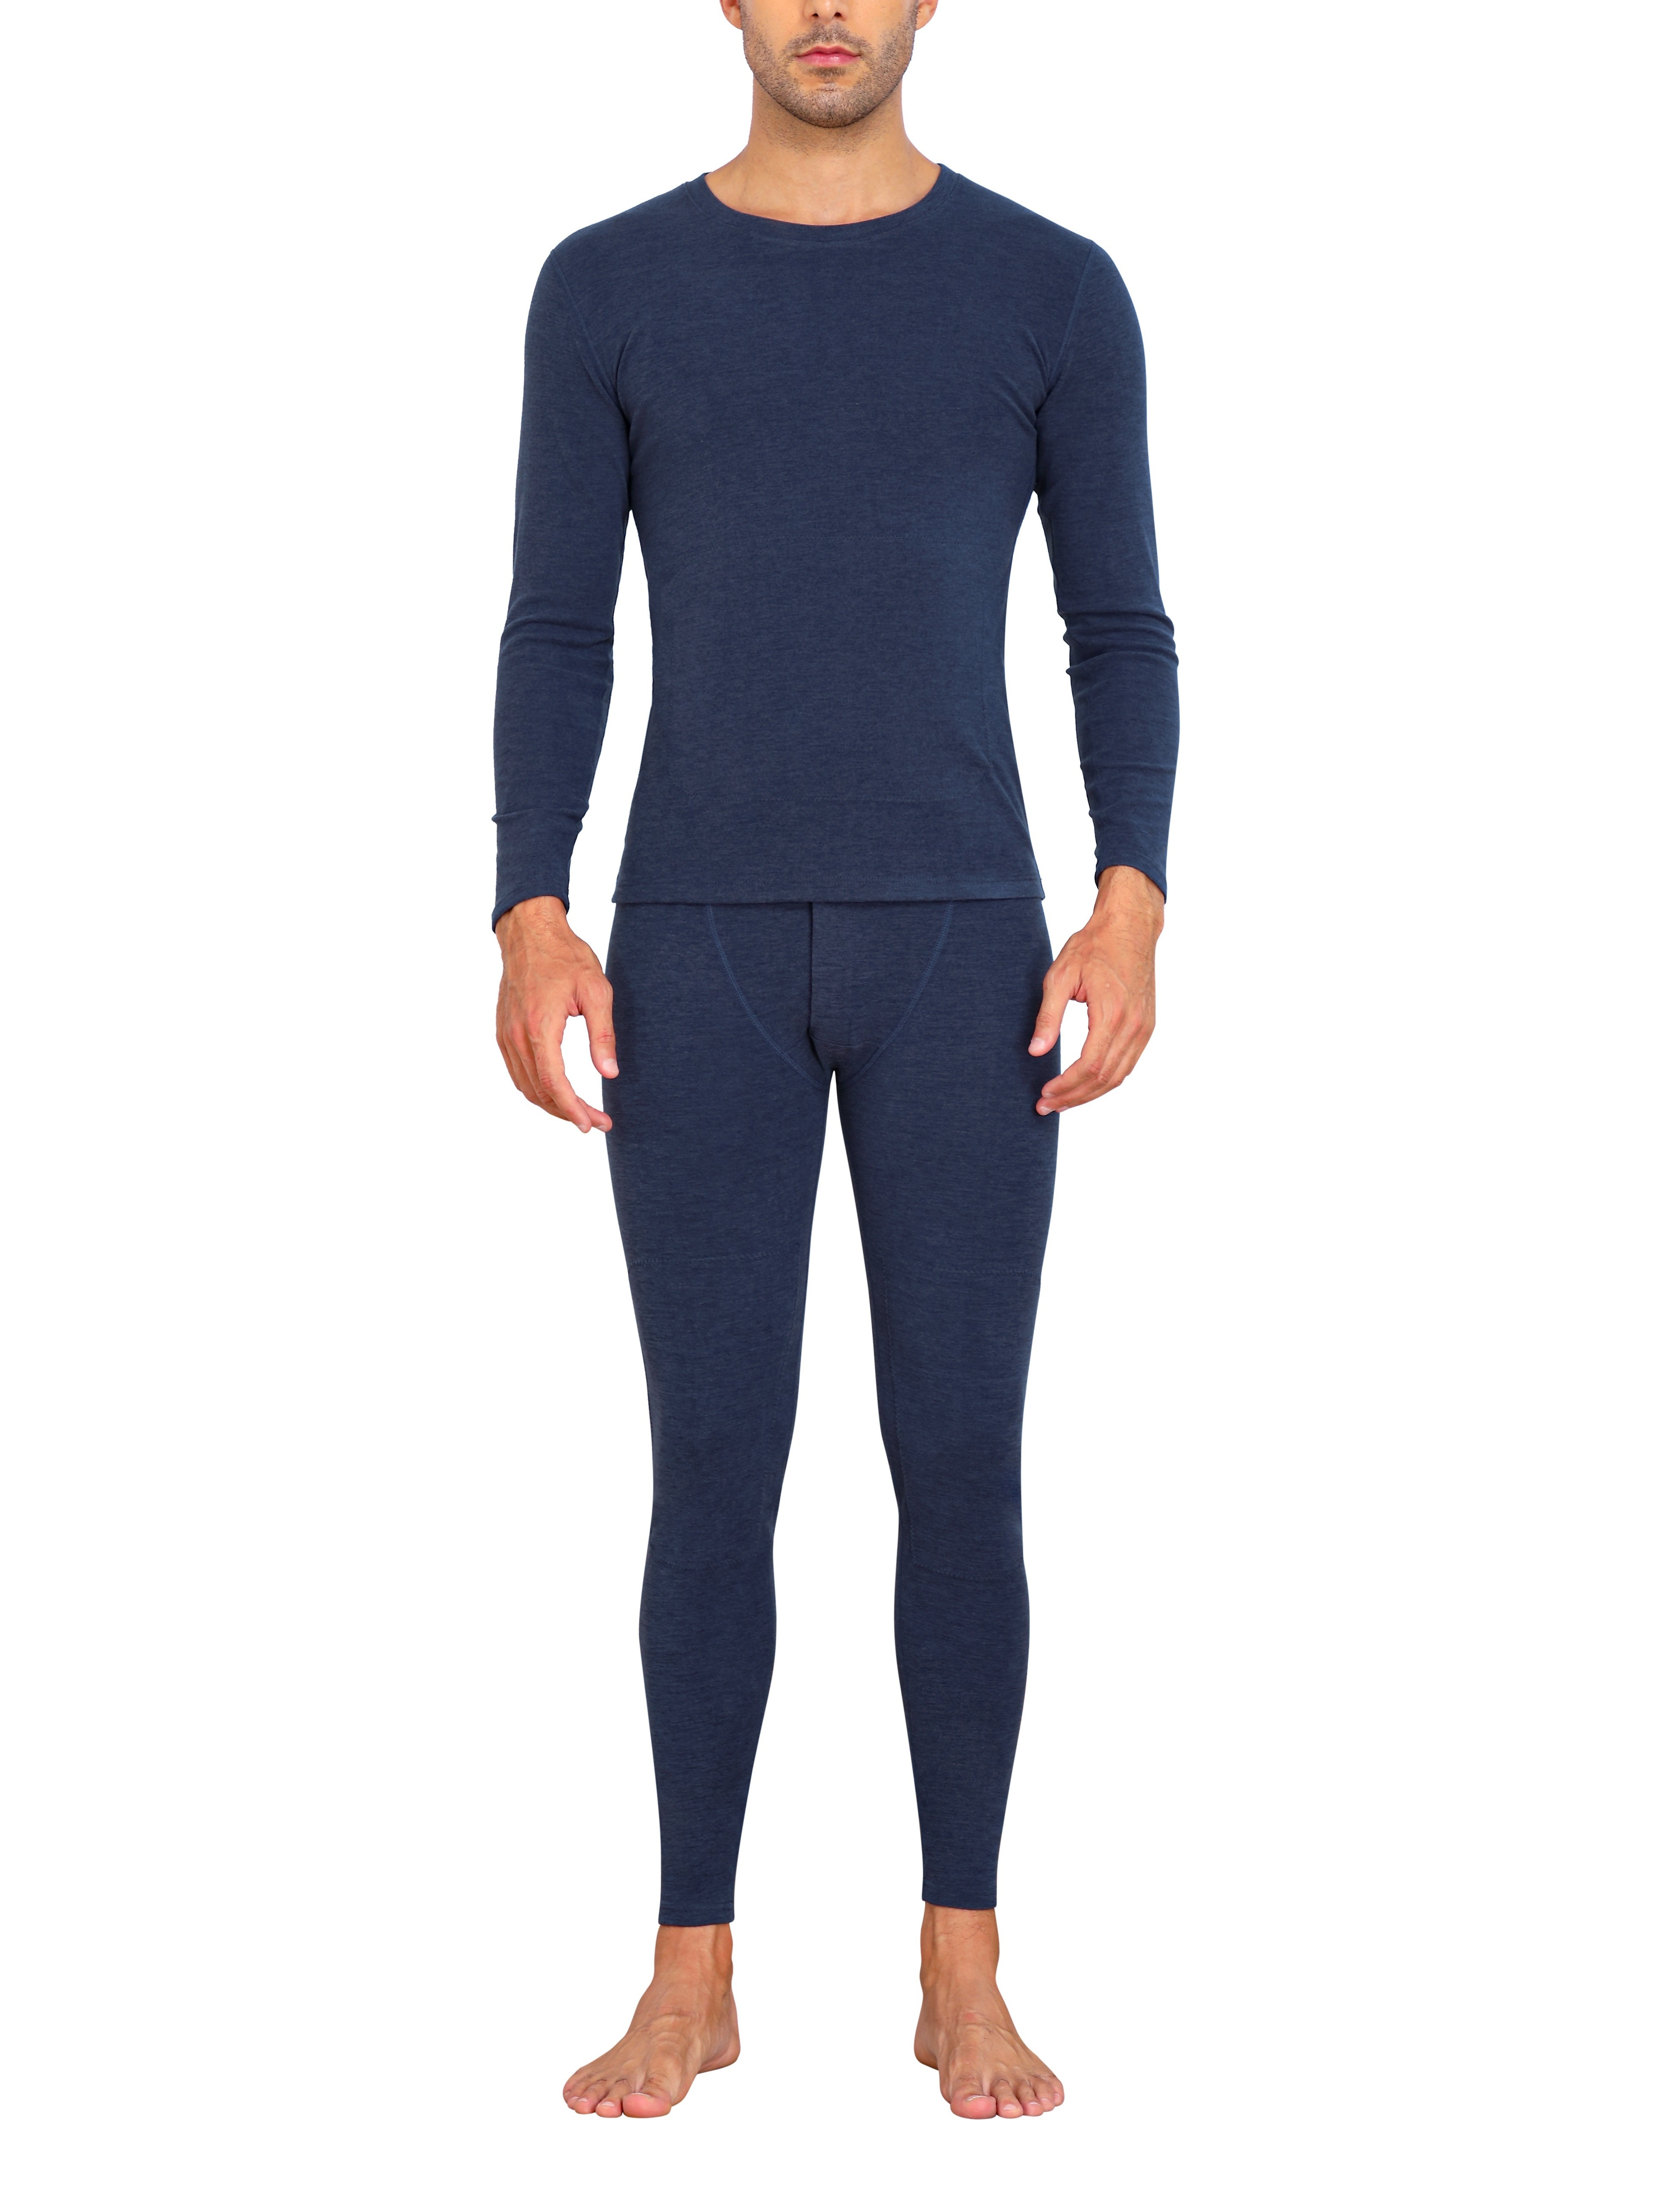 2pcs Thermal Underwear Set For Men, Ultra Soft Long Johns Fleece Lined Base  Layer Cold Weather Top And Bottom Set